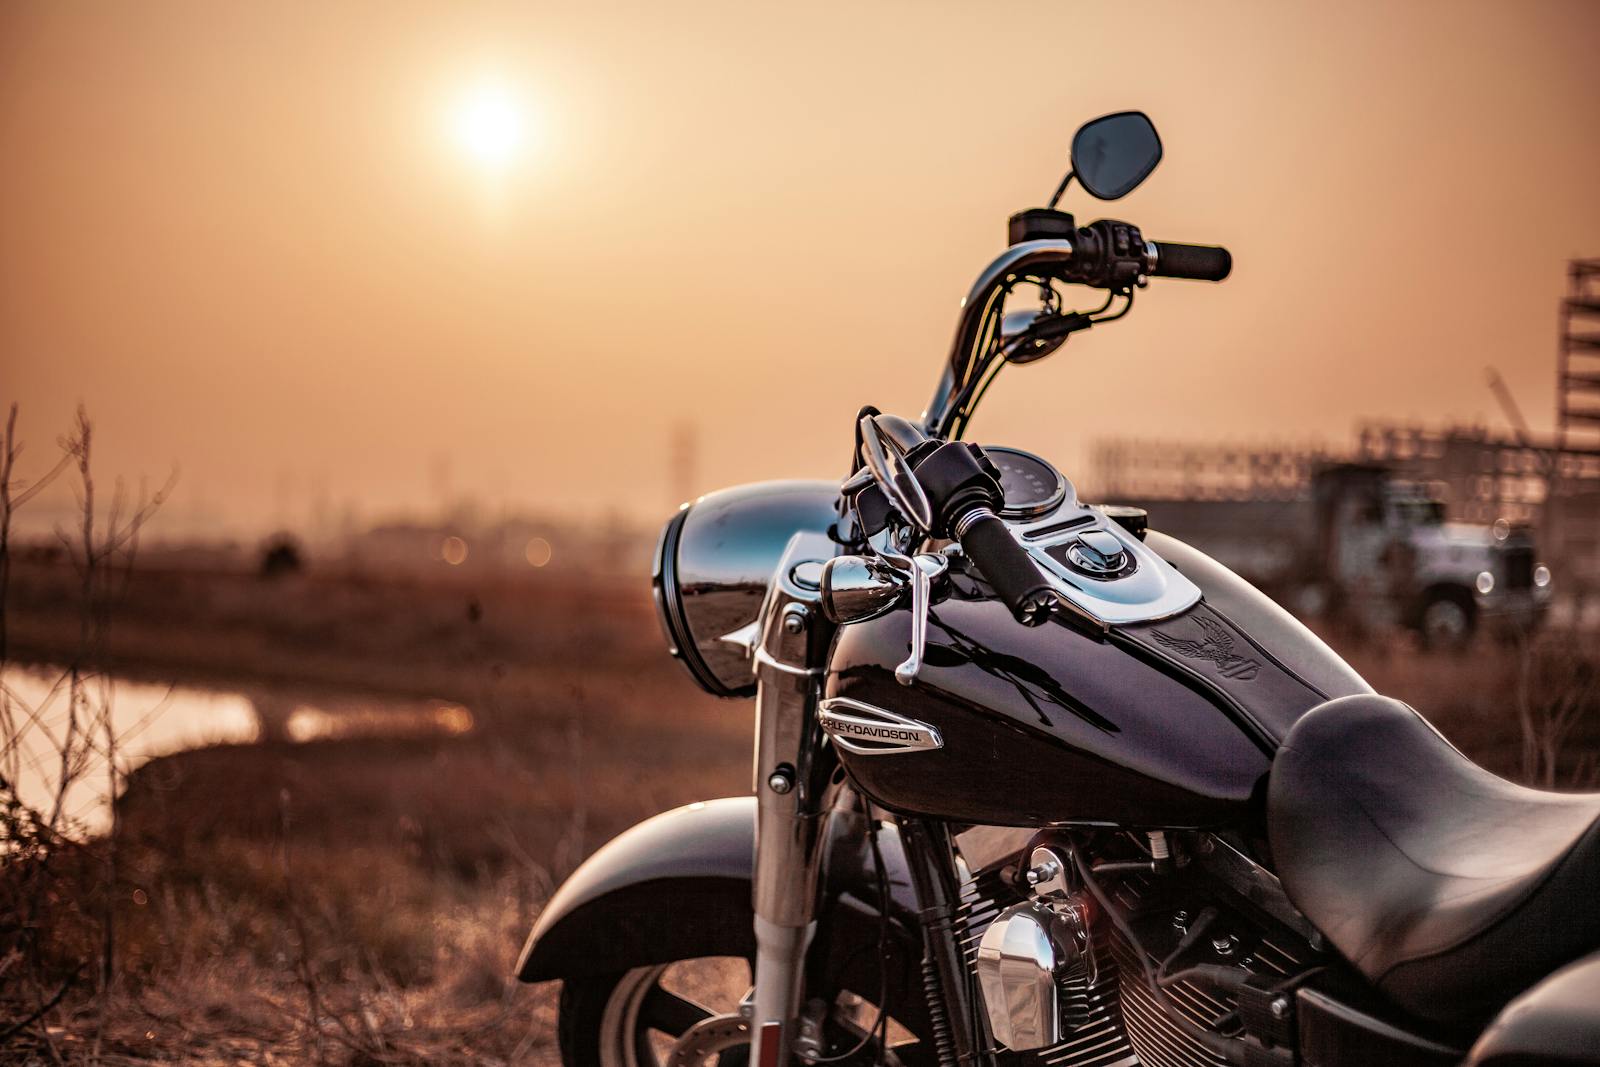 Preparing Your Motorcycle for Spring Riding